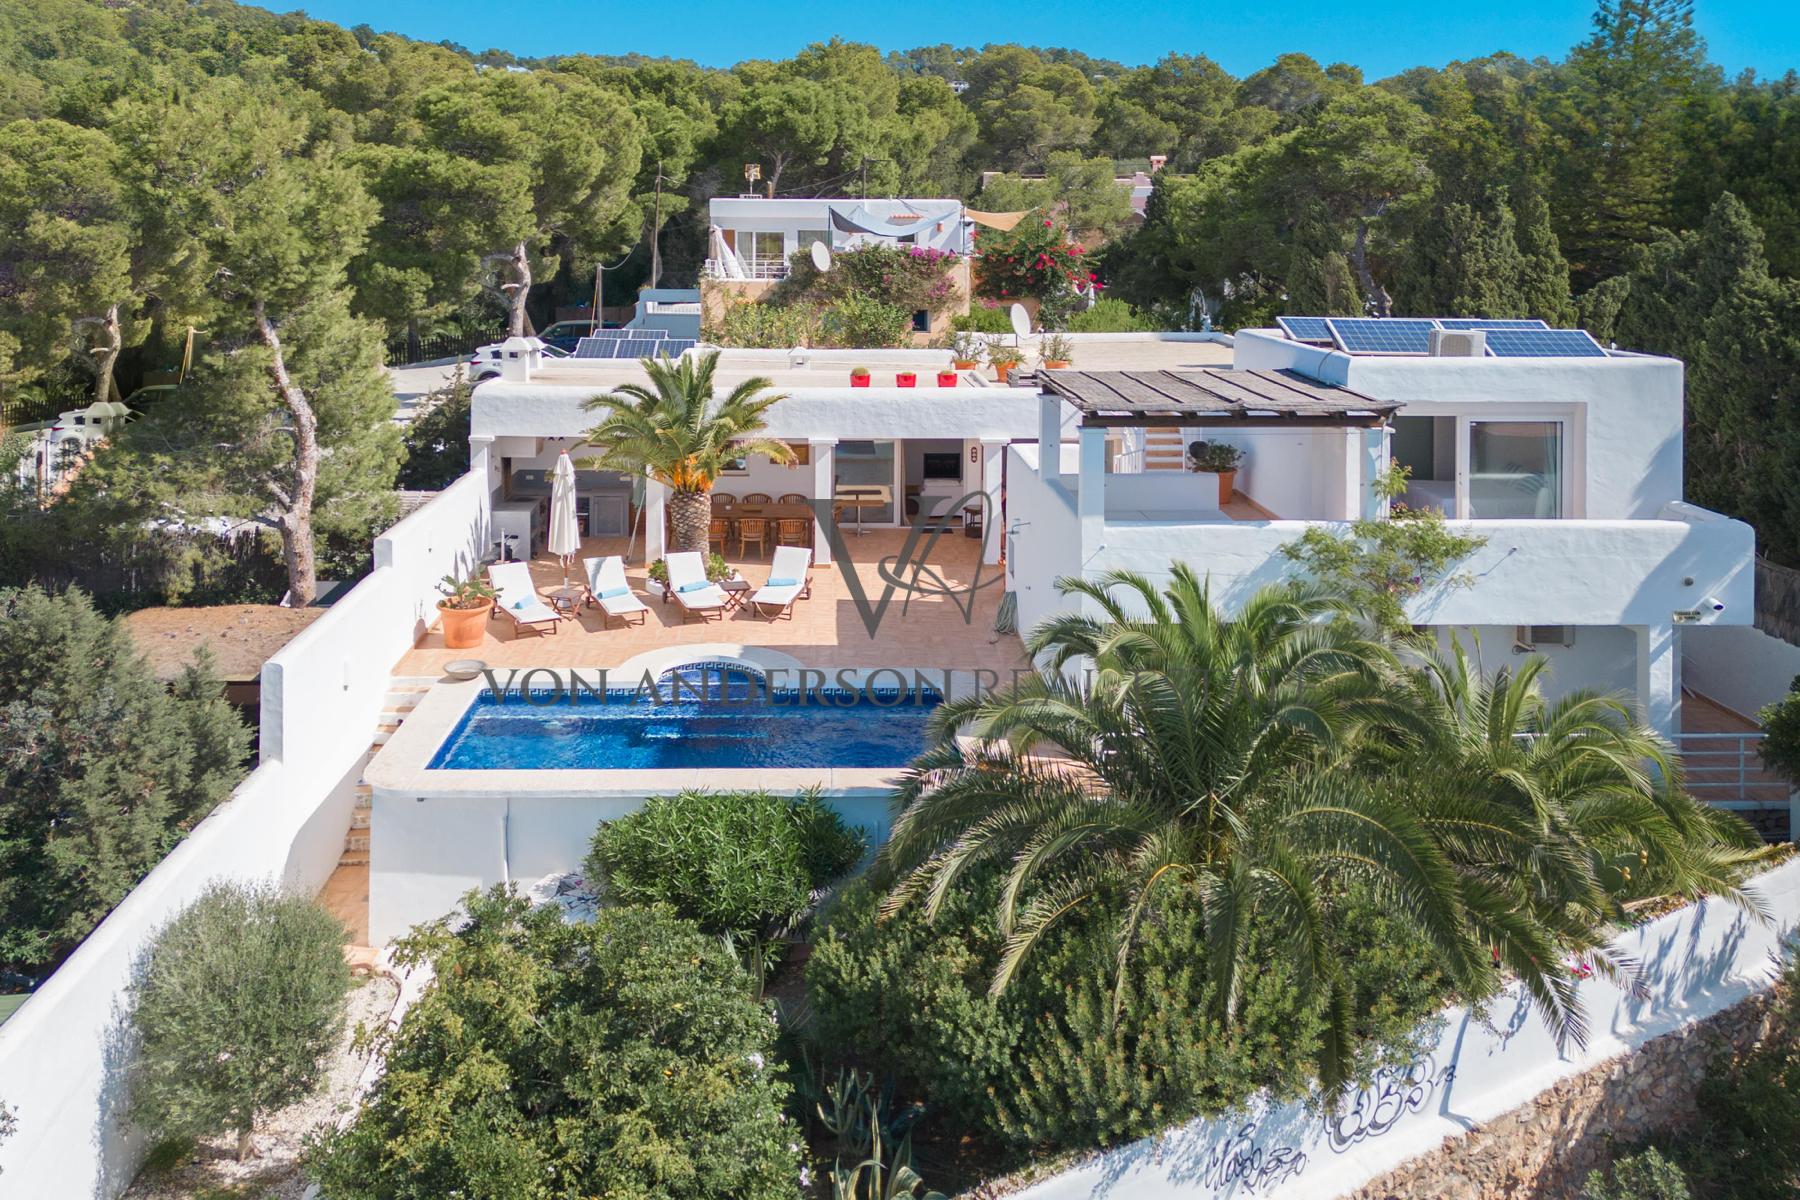 Charming Frontline Detached Villa with Direct Bay & Beach Access, ref. VA1063, for sale in Ibiza by Von Anderson Real Estate